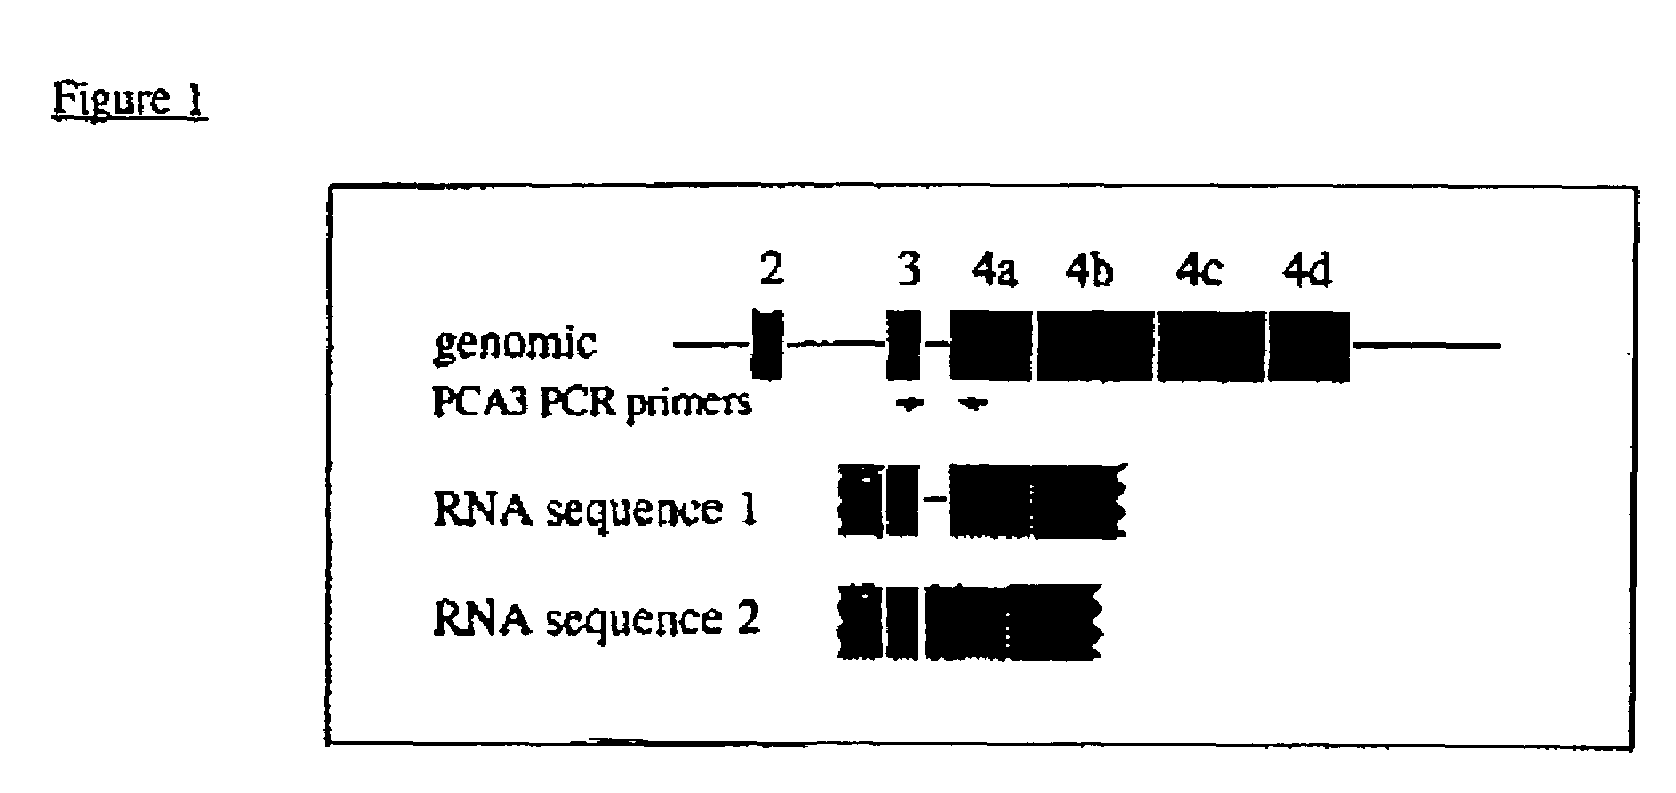 PCA3 messenger RNA species in benign and malignant prostate tissues